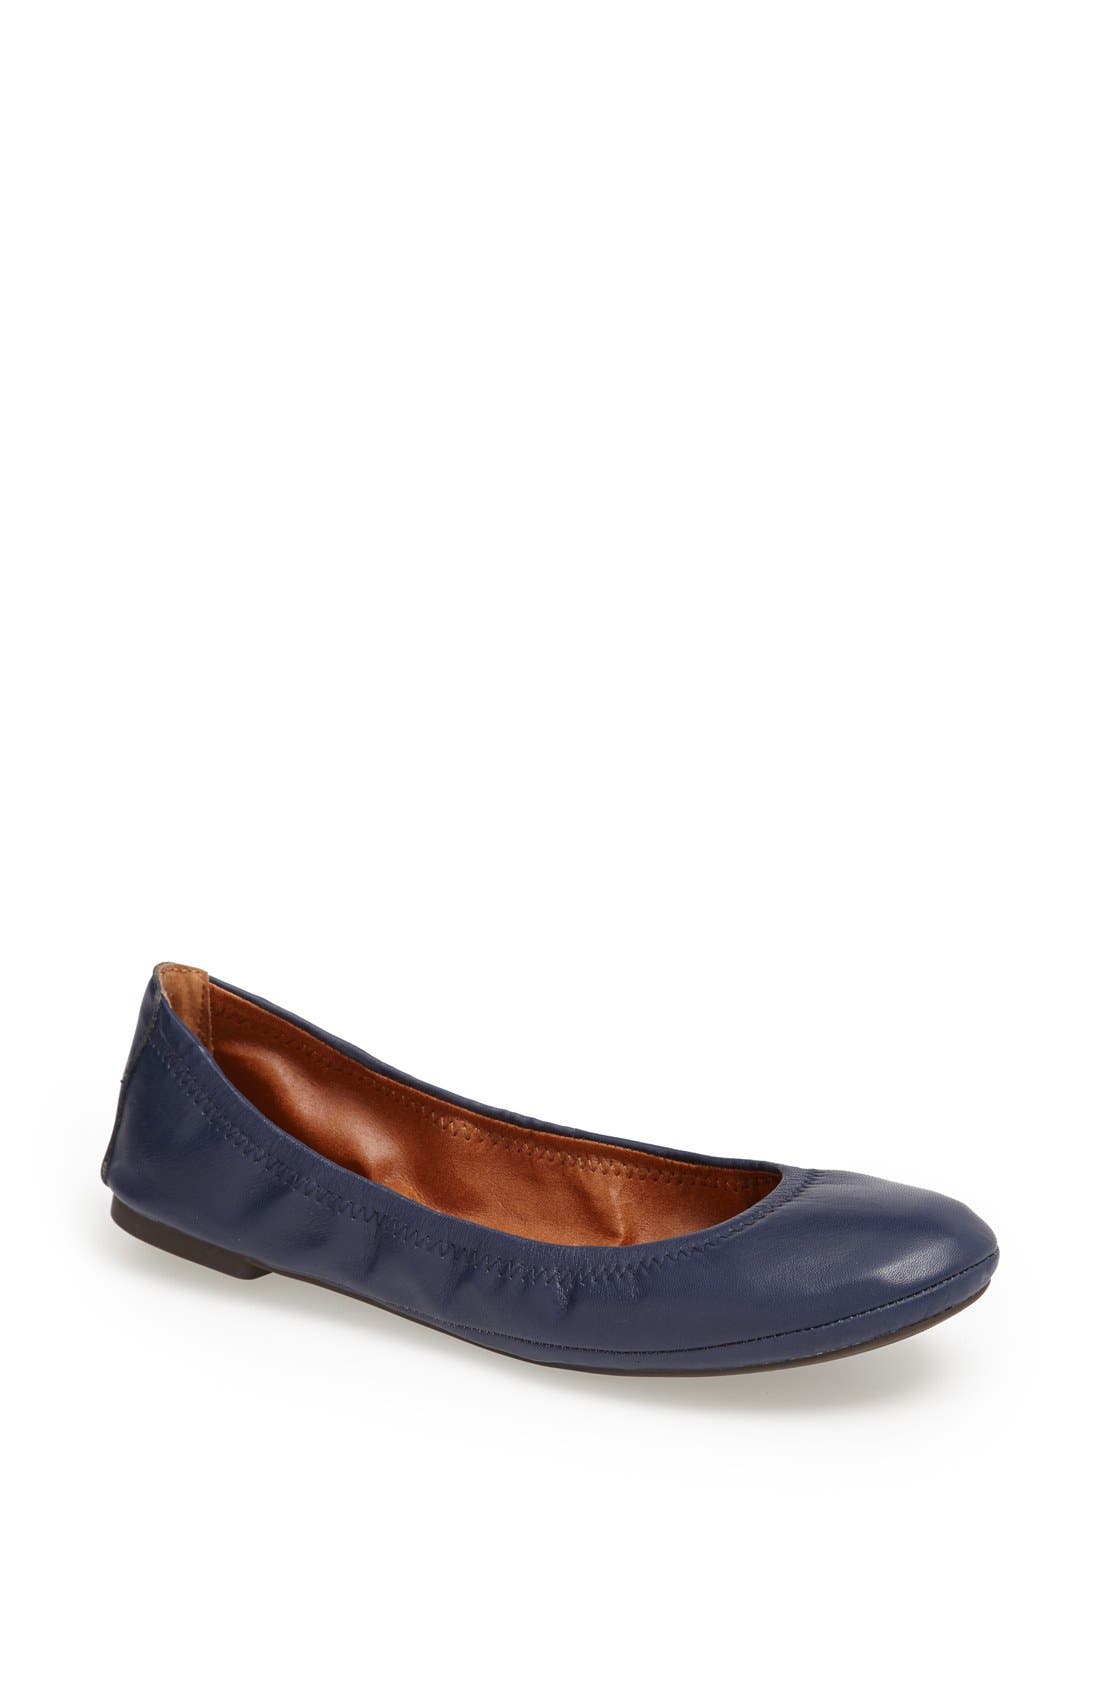 lucky brand shoes nordstrom